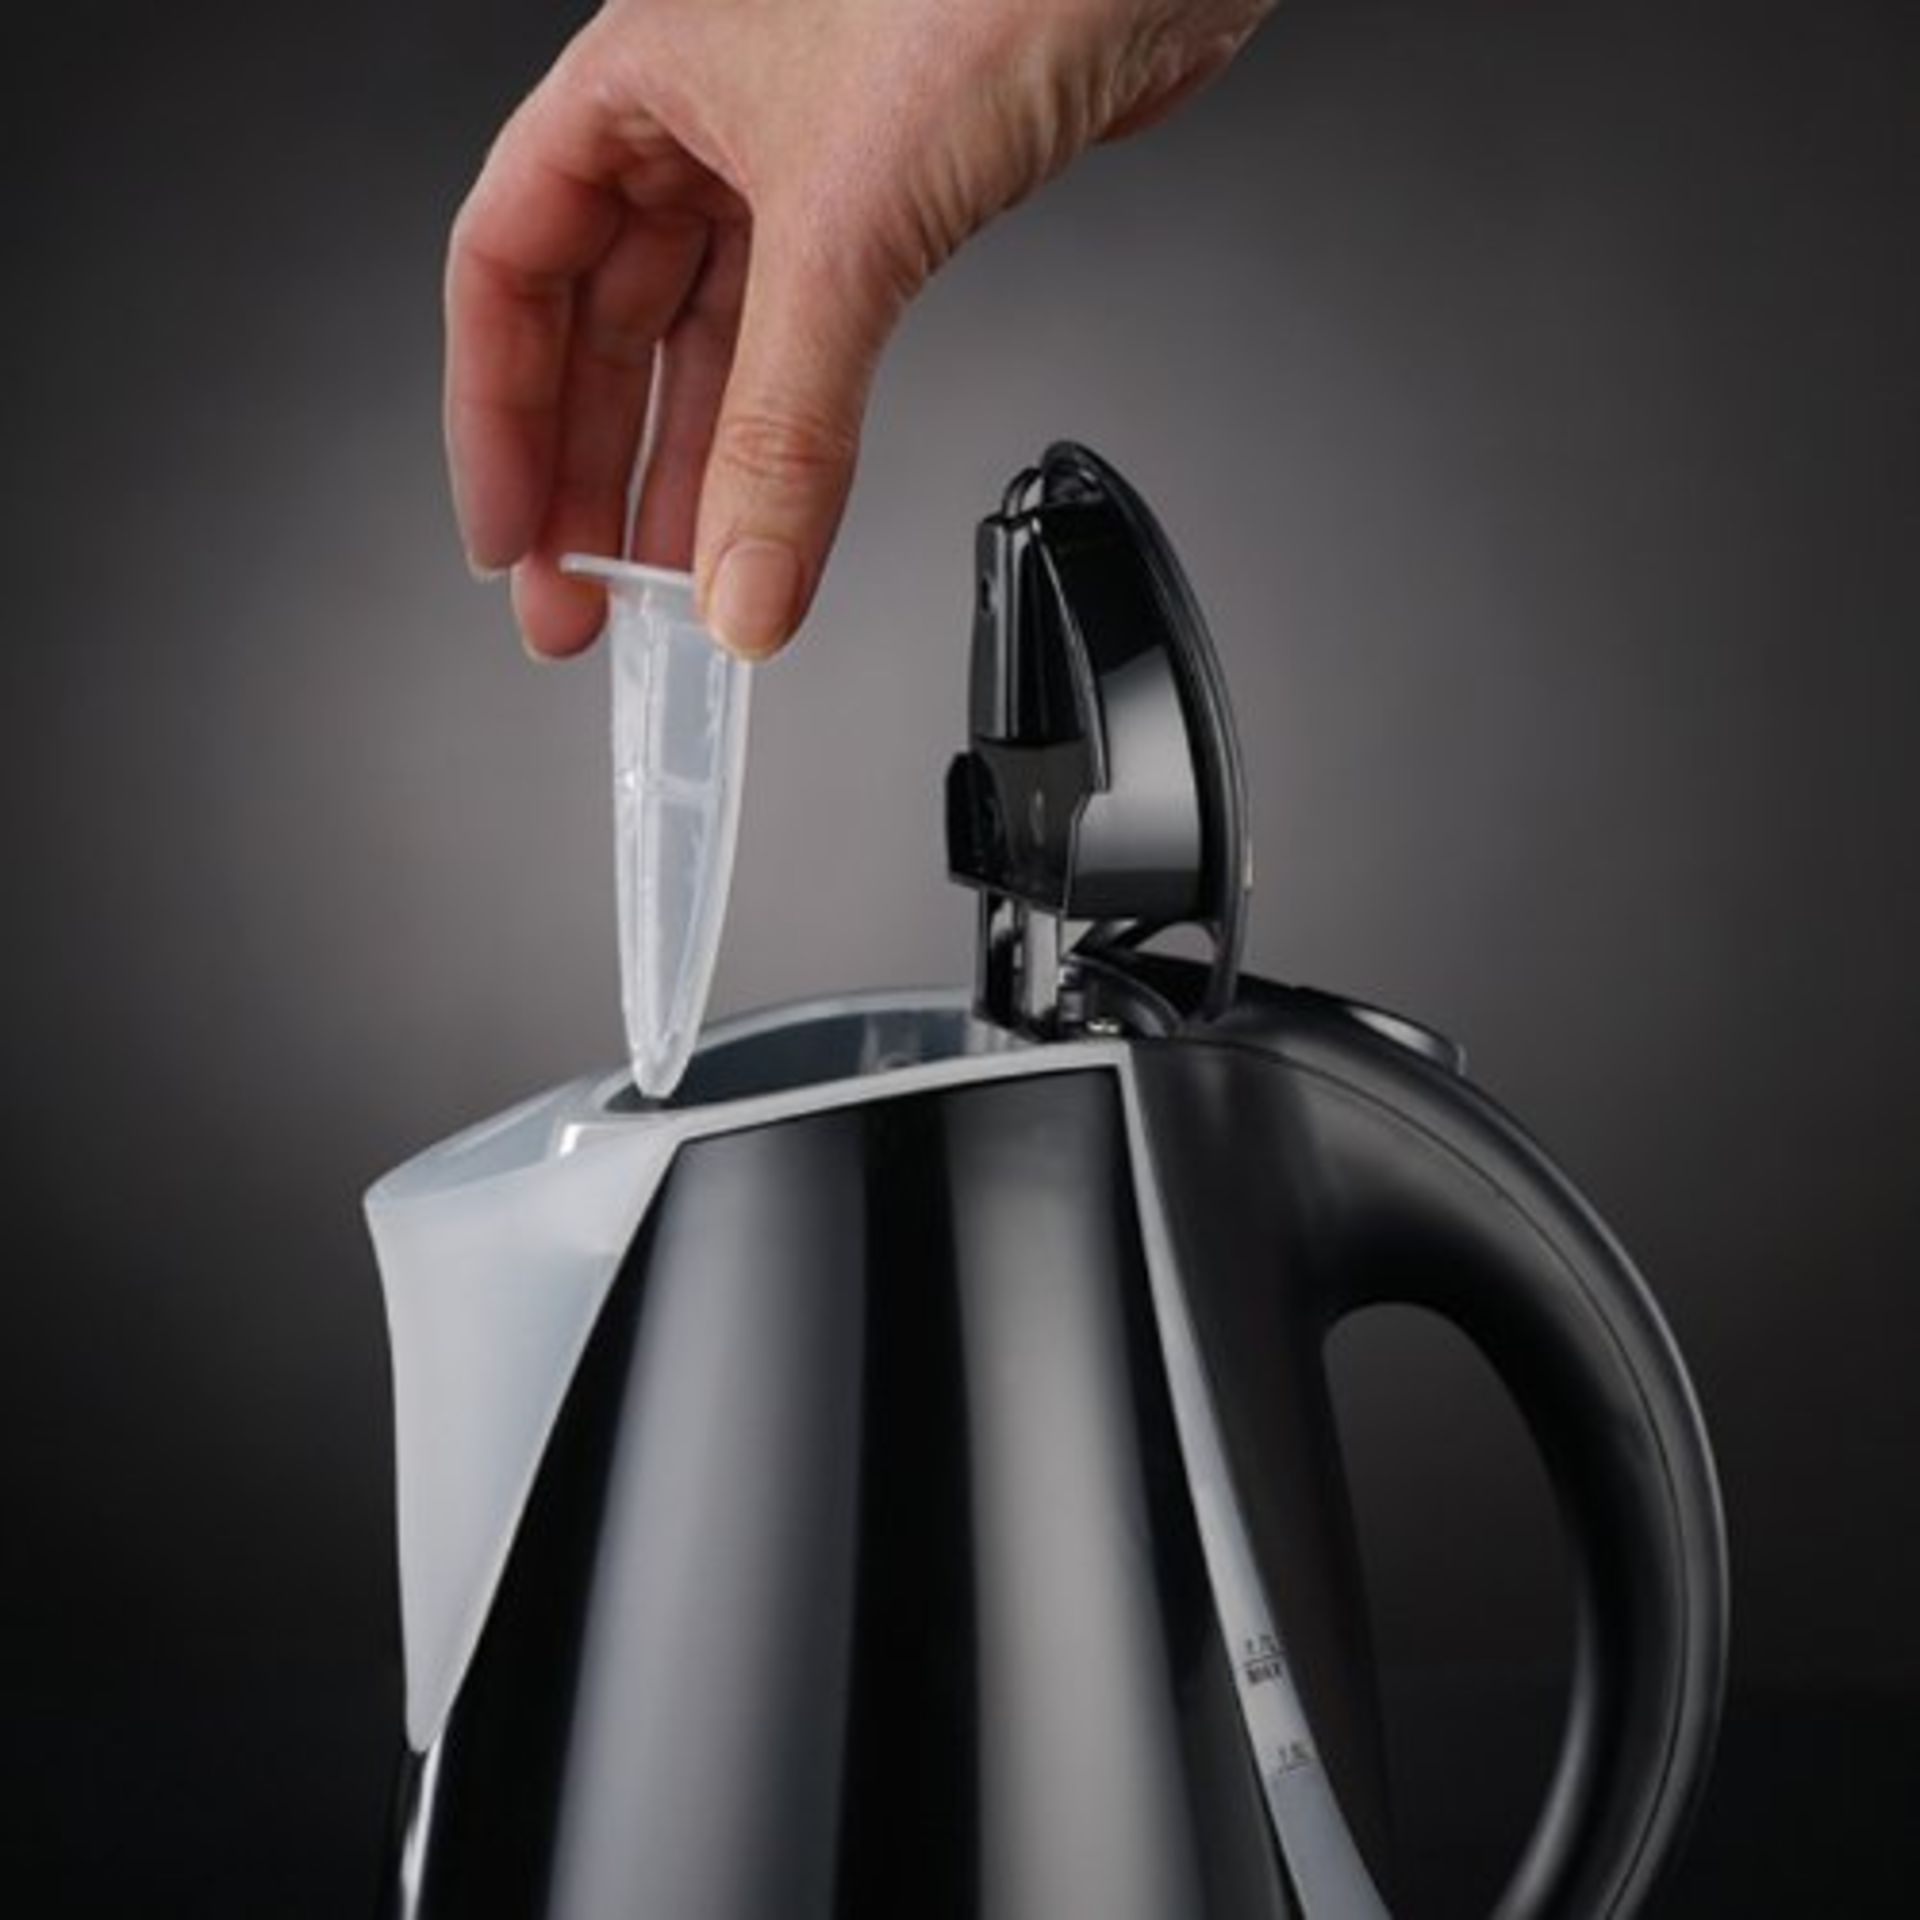 V *TRADE QTY* Brand New Russell Hobbs Kettle - 1.6 Litre - 3KW Rapid Boil - 360 Degree Base For - Image 2 of 3